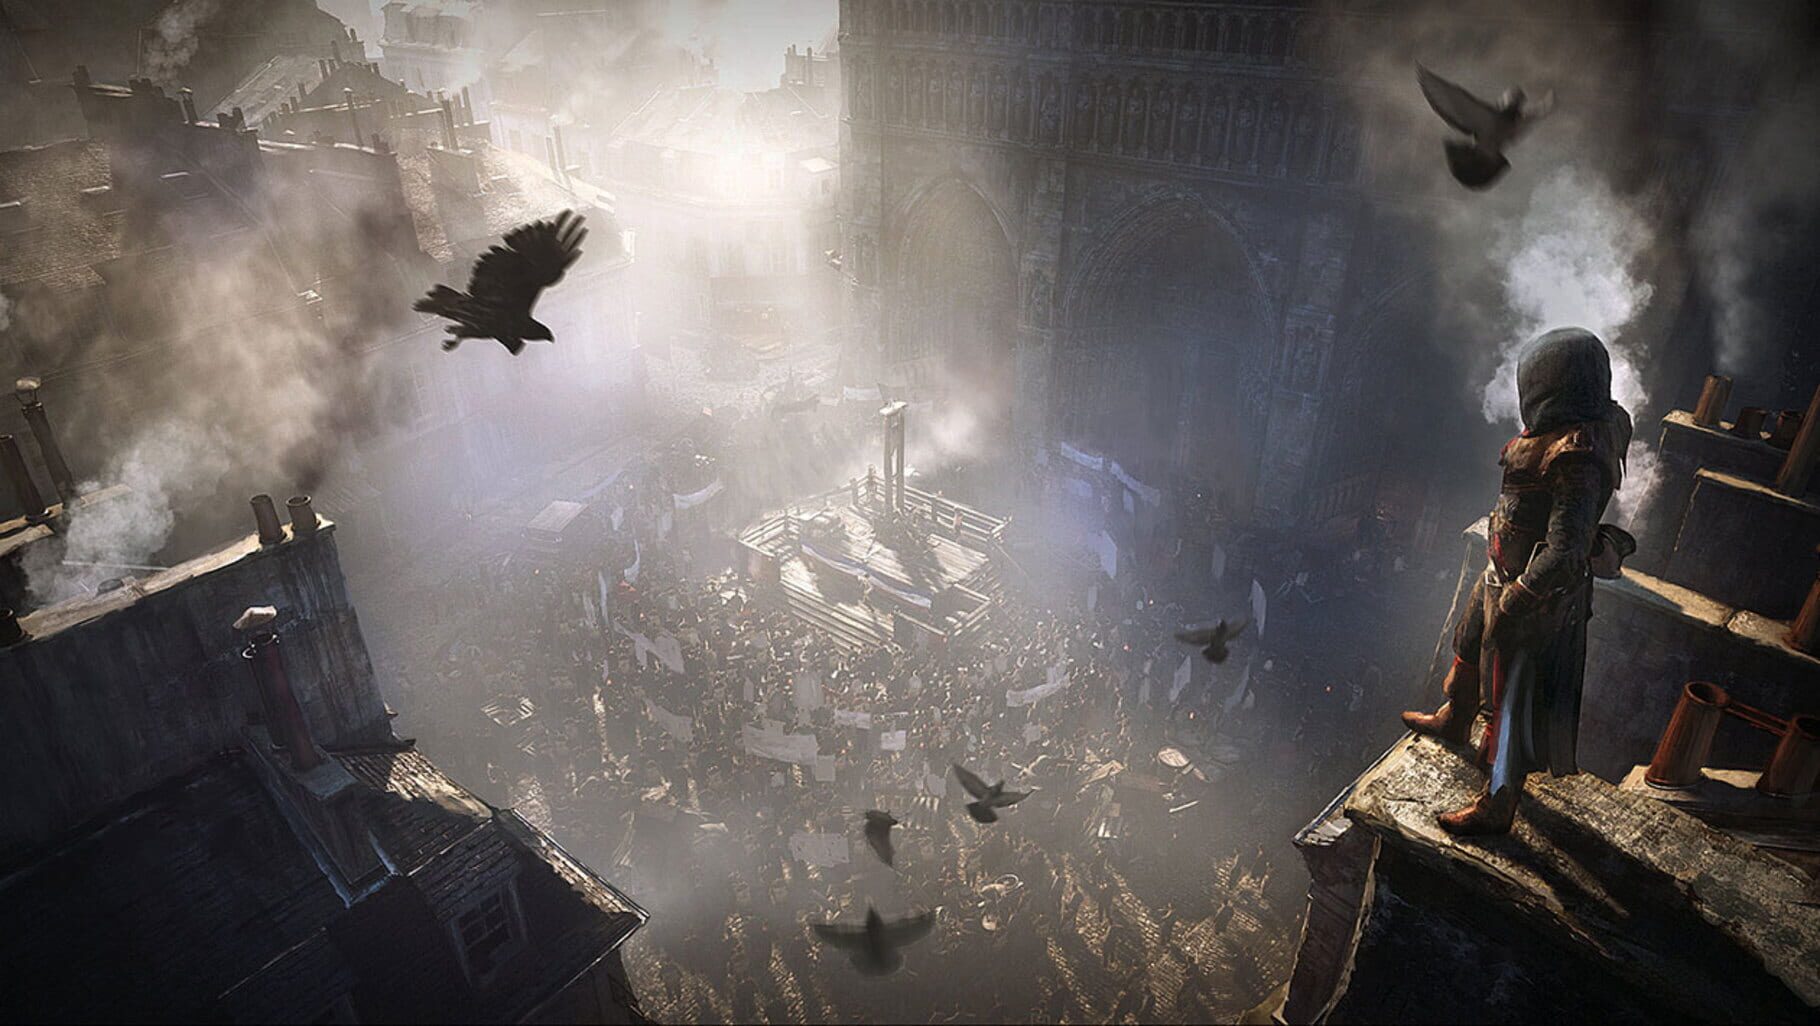 Assassin's Creed Unity Image